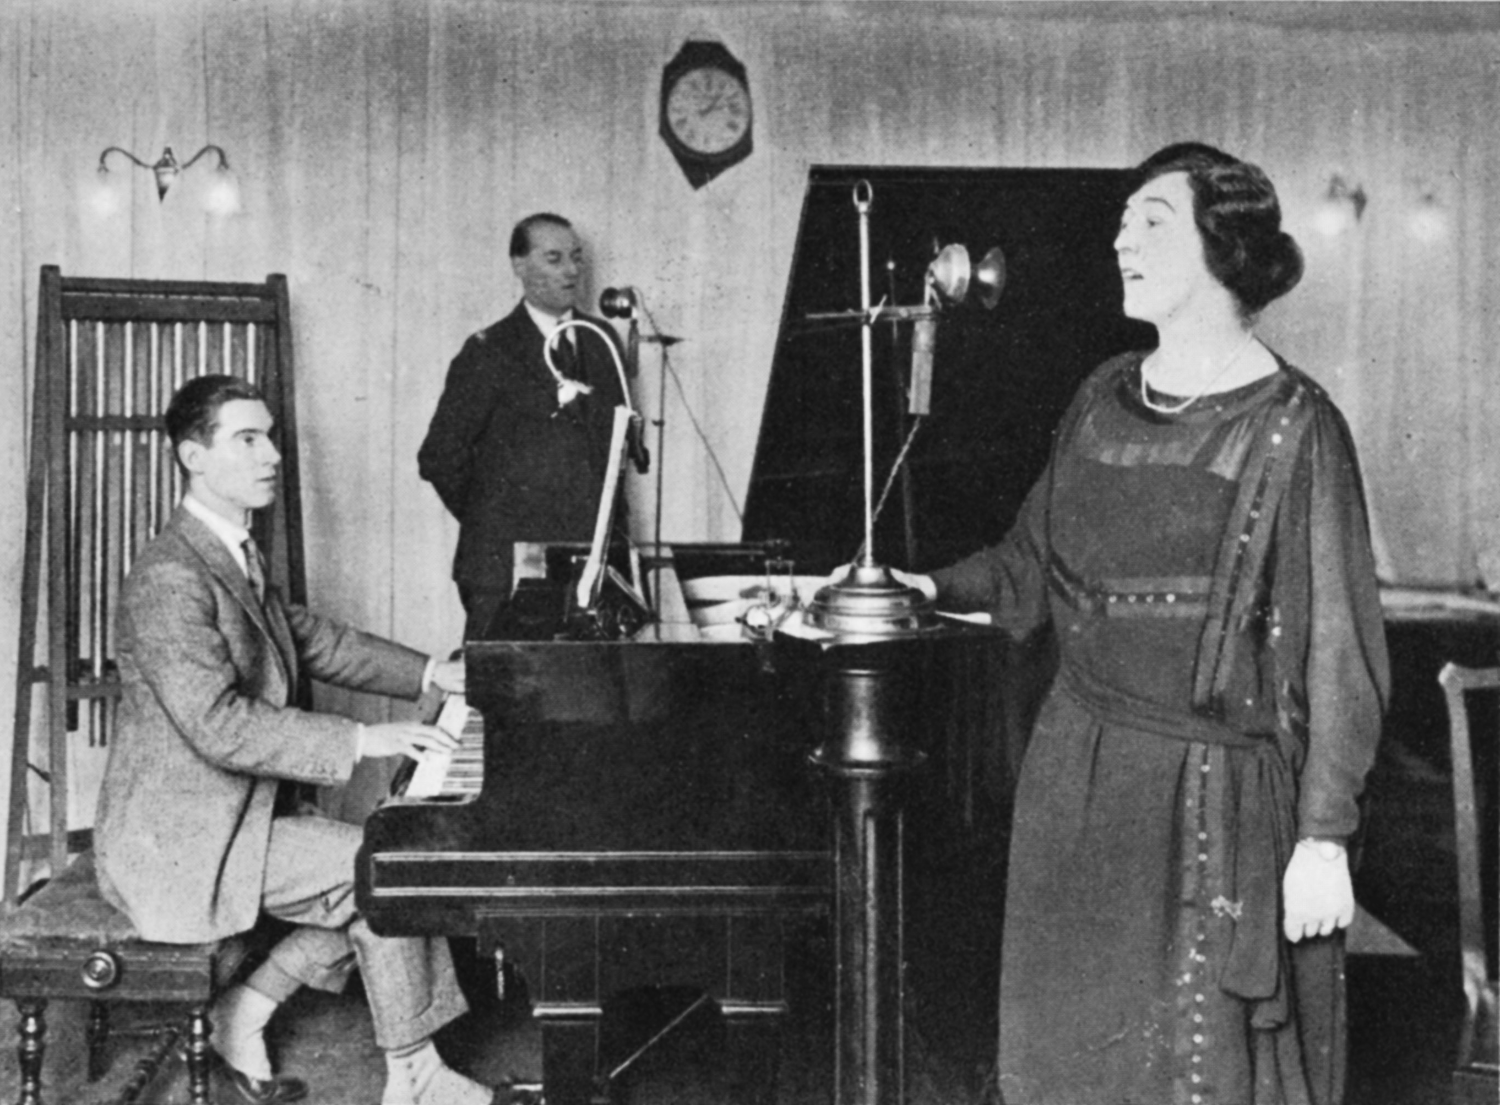 Man at a piano, man at a microphone, woman sings into a microphone